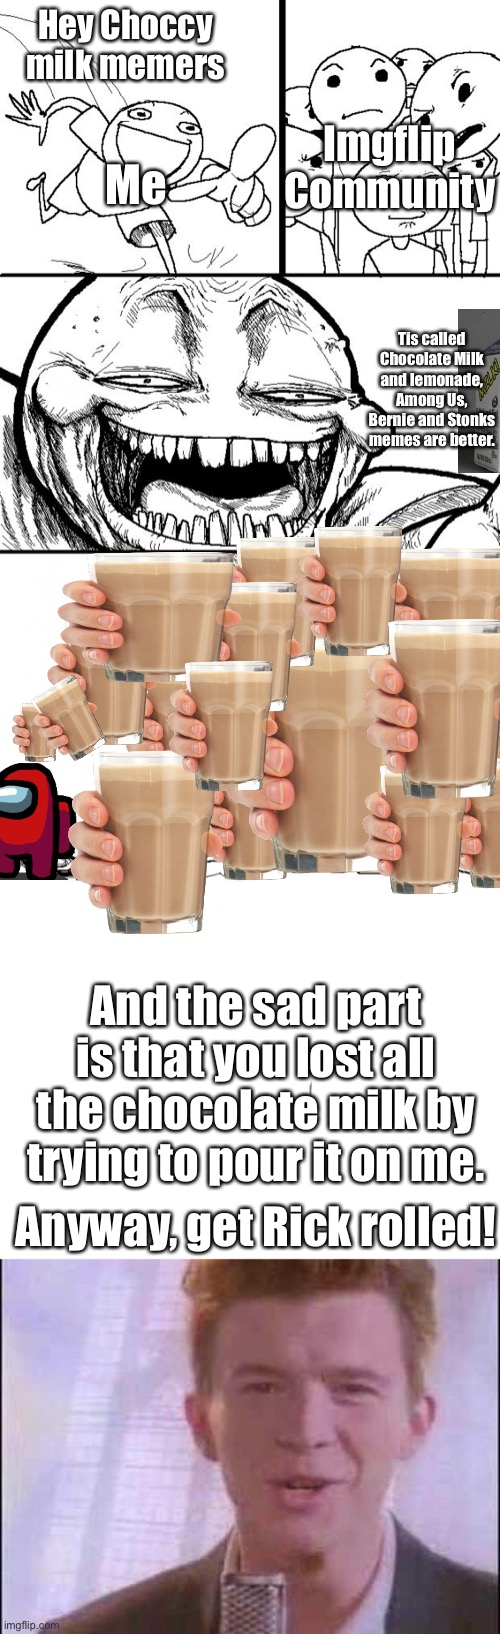 Scroll down for the best part | Hey Choccy milk memers; Imgflip Community; Me; Tis called Chocolate Milk and lemonade, Among Us, Bernie and Stonks memes are better. And the sad part is that you lost all the chocolate milk by trying to pour it on me. Anyway, get Rick rolled! | image tagged in memes,hey internet,imgflip,choccy milk,i dont know what i am doing | made w/ Imgflip meme maker